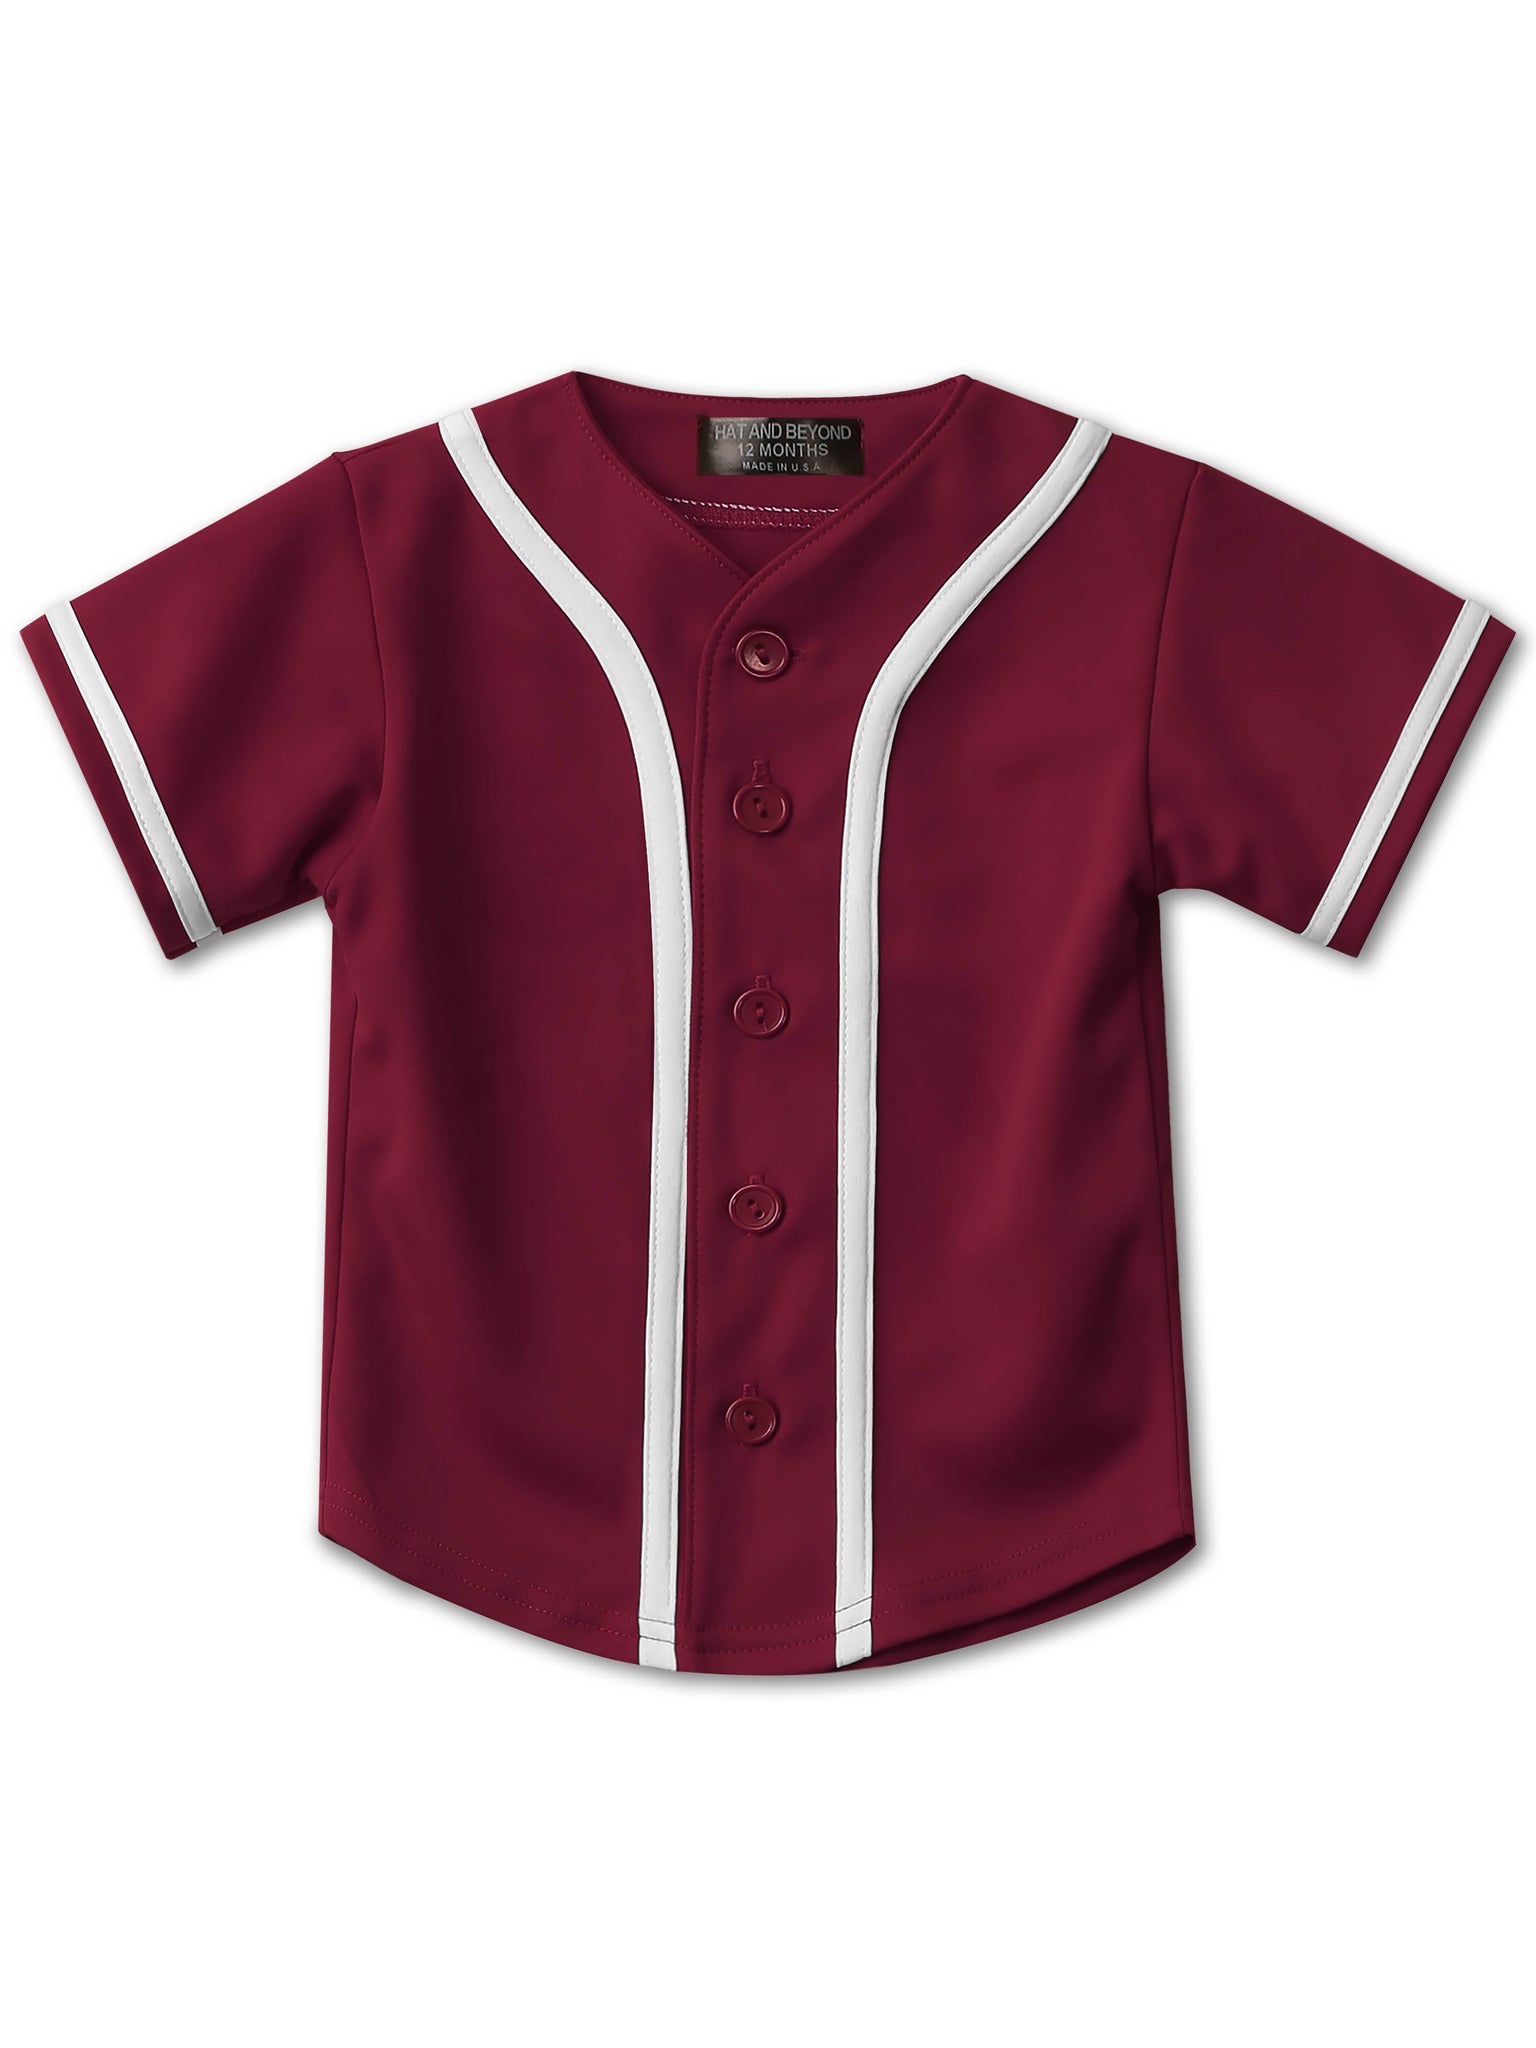 plain red and white baseball jersey